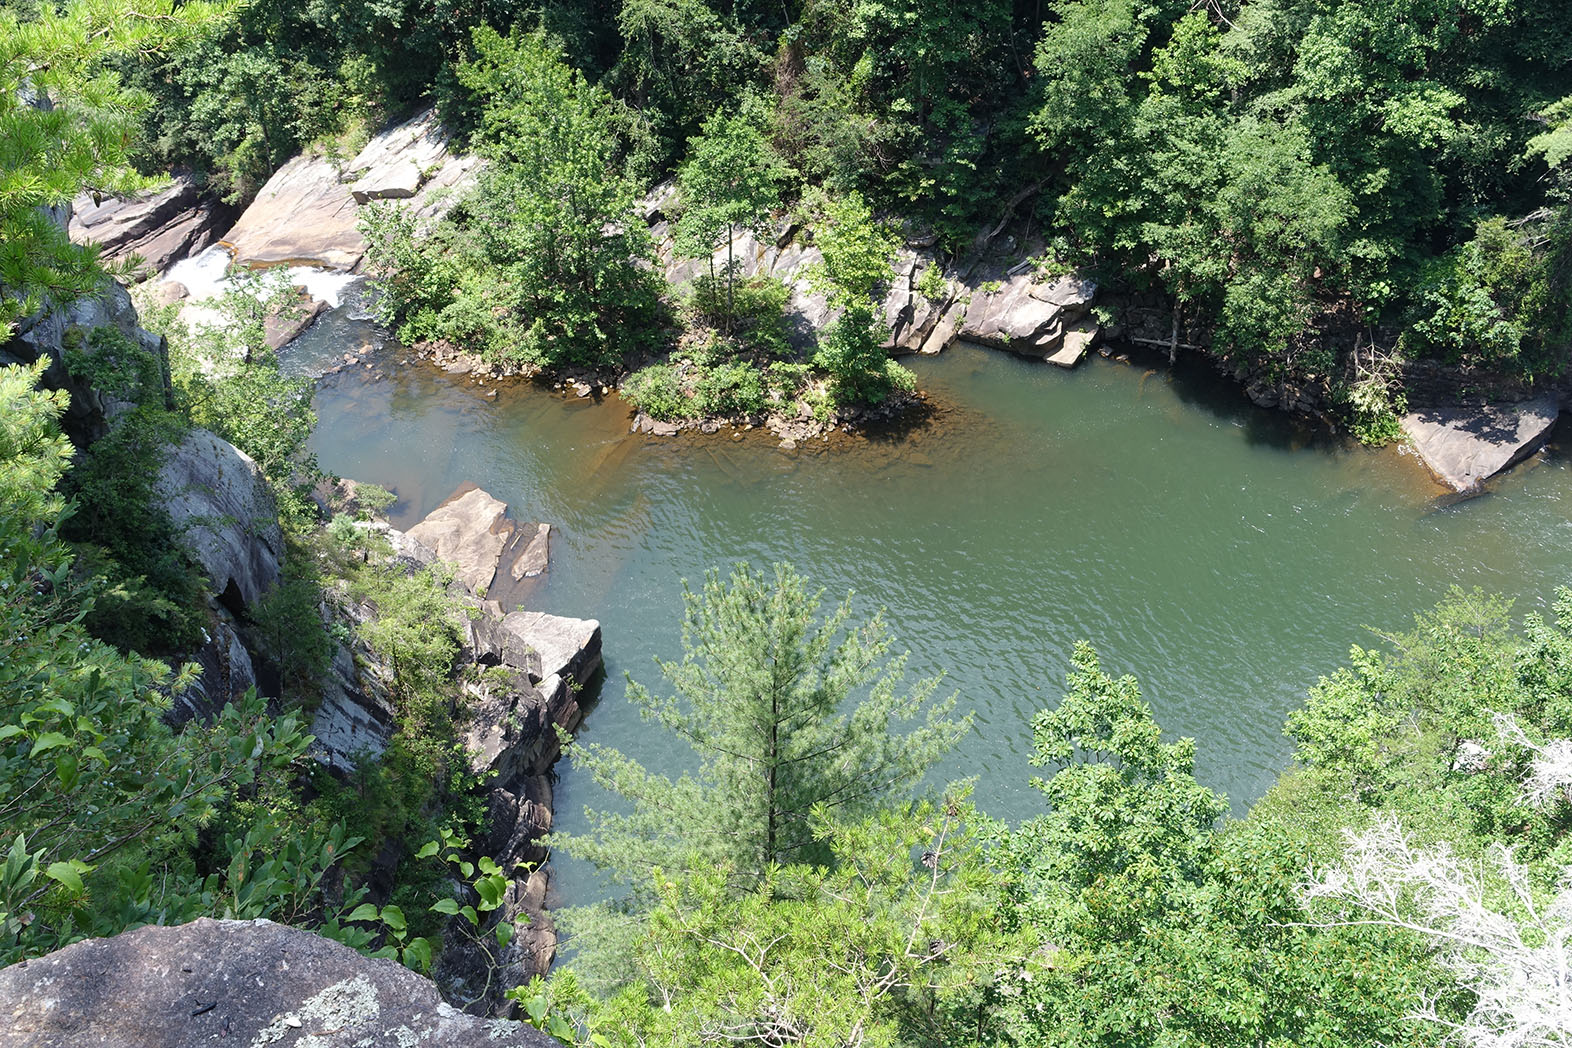 Swimming hole at the bottom of the gorge between the Tallulah Falls